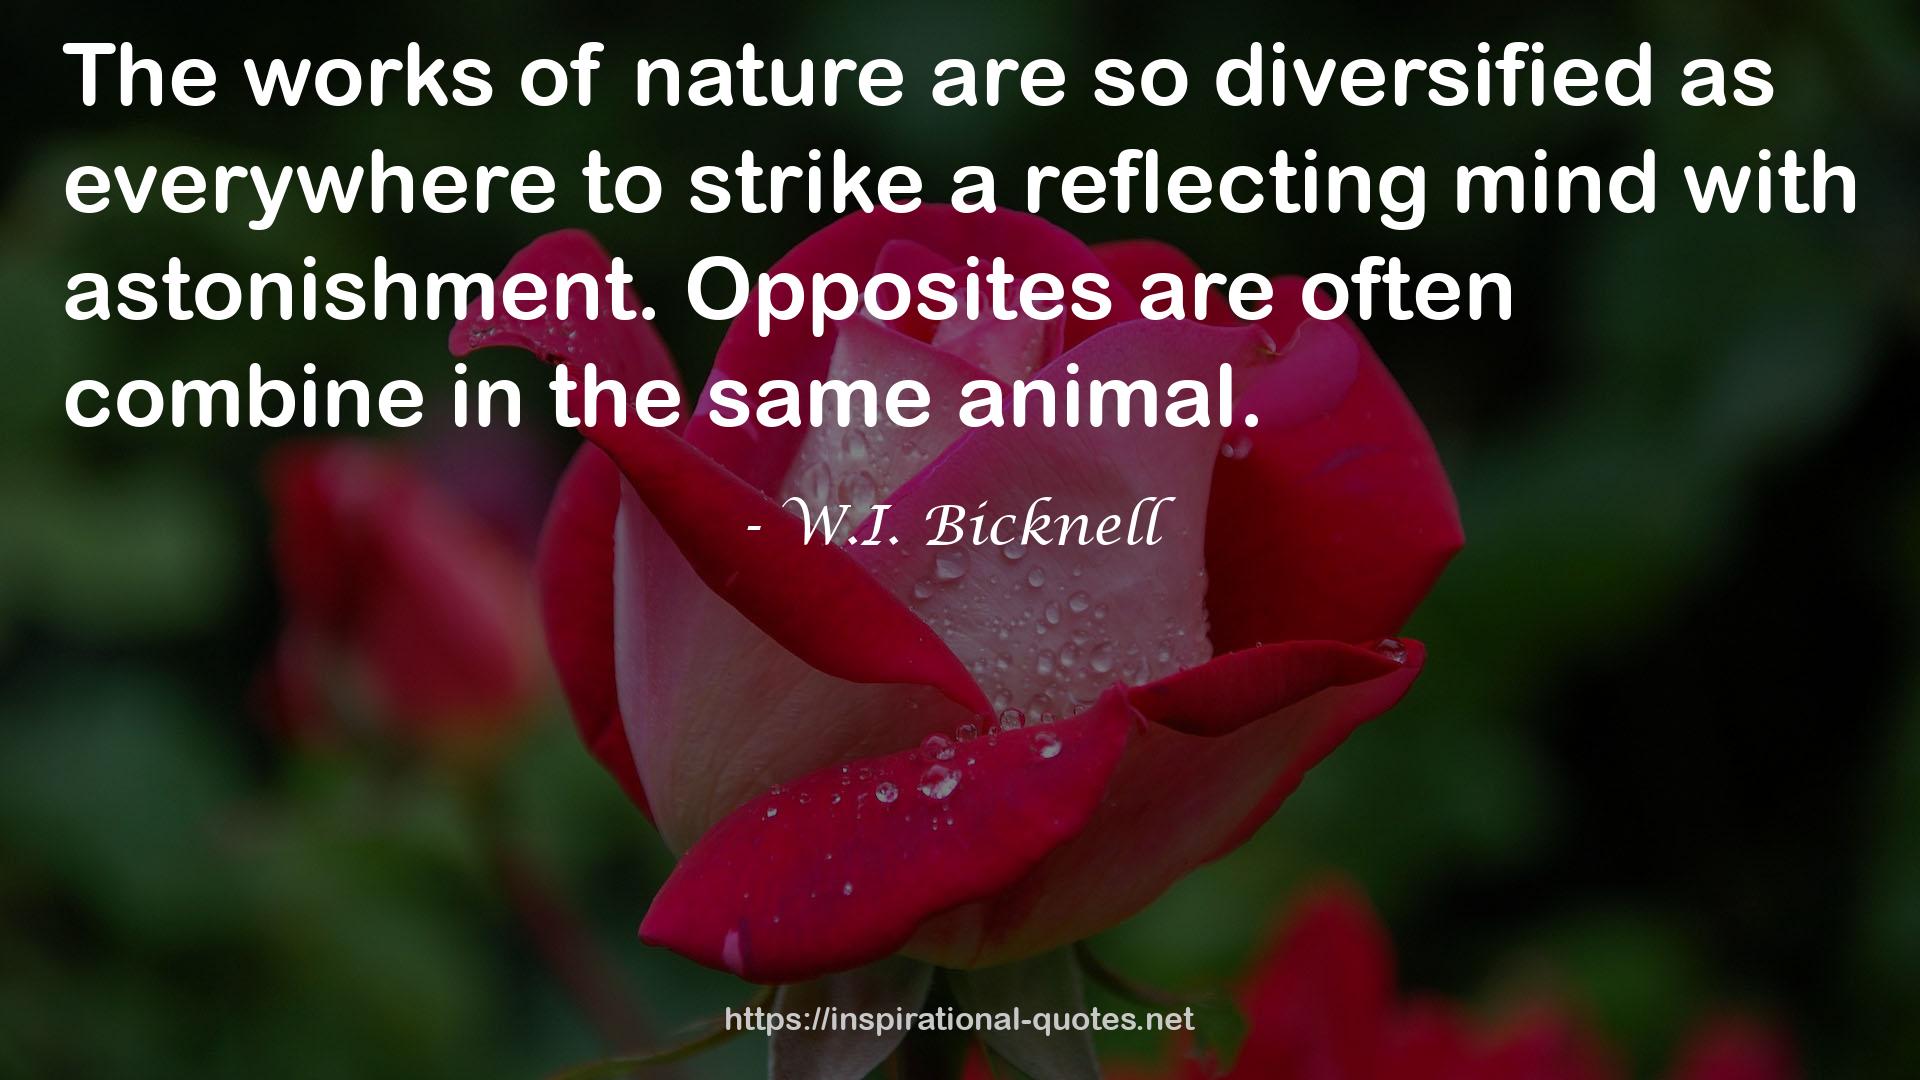 W.I. Bicknell QUOTES